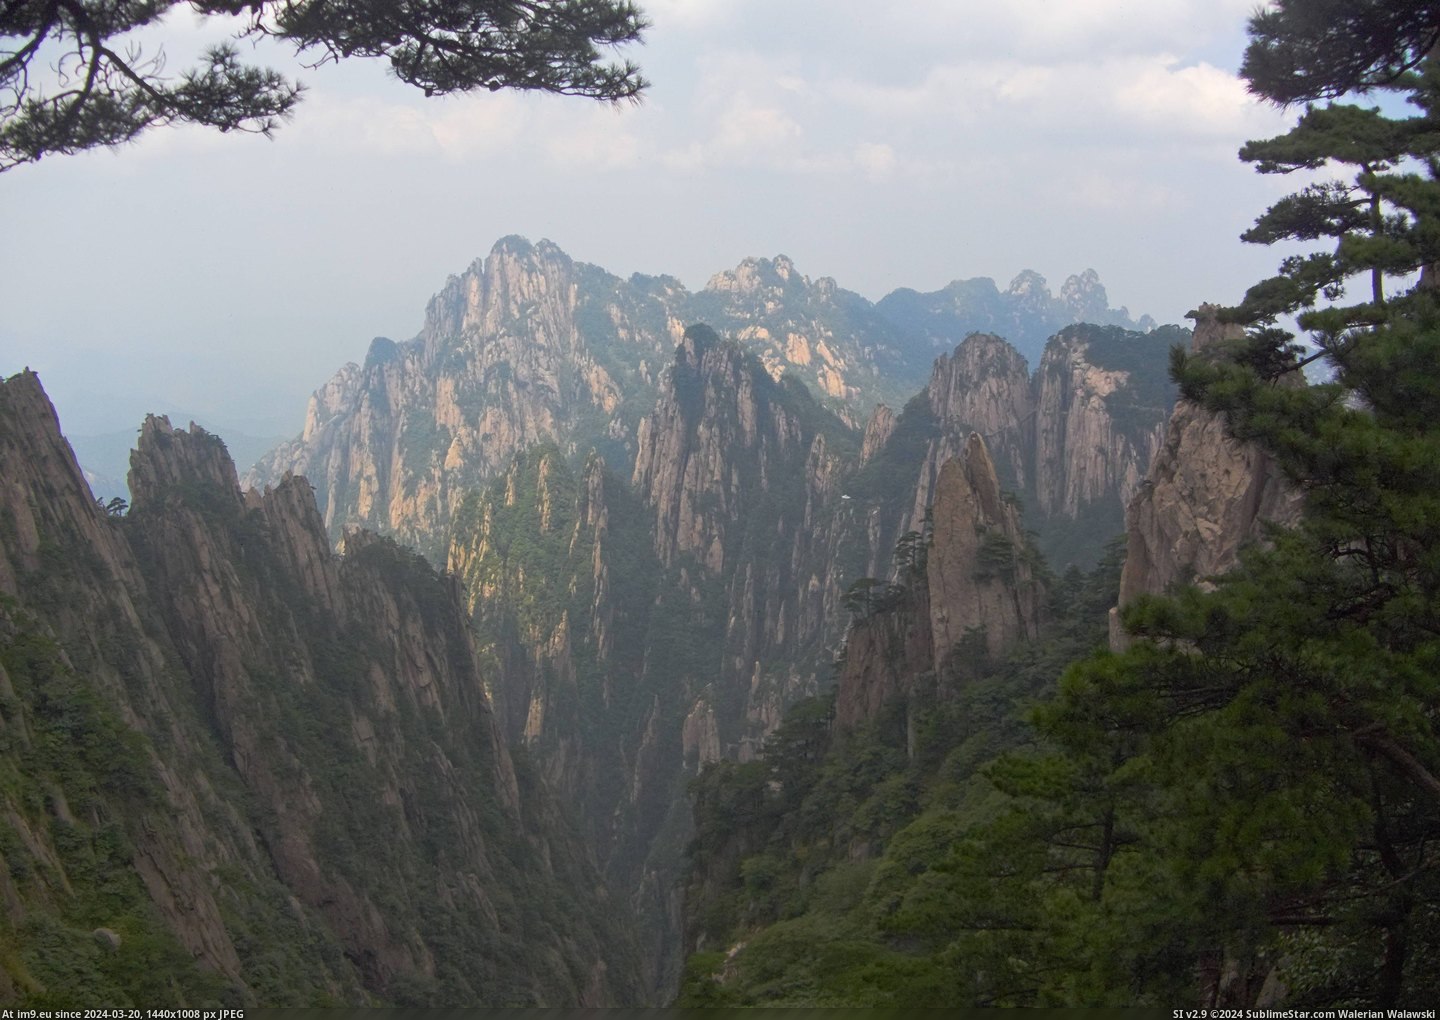  #China  [Earthporn] Huang Shan, China  [3811x2681] Pic. (Изображение из альбом My r/EARTHPORN favs))